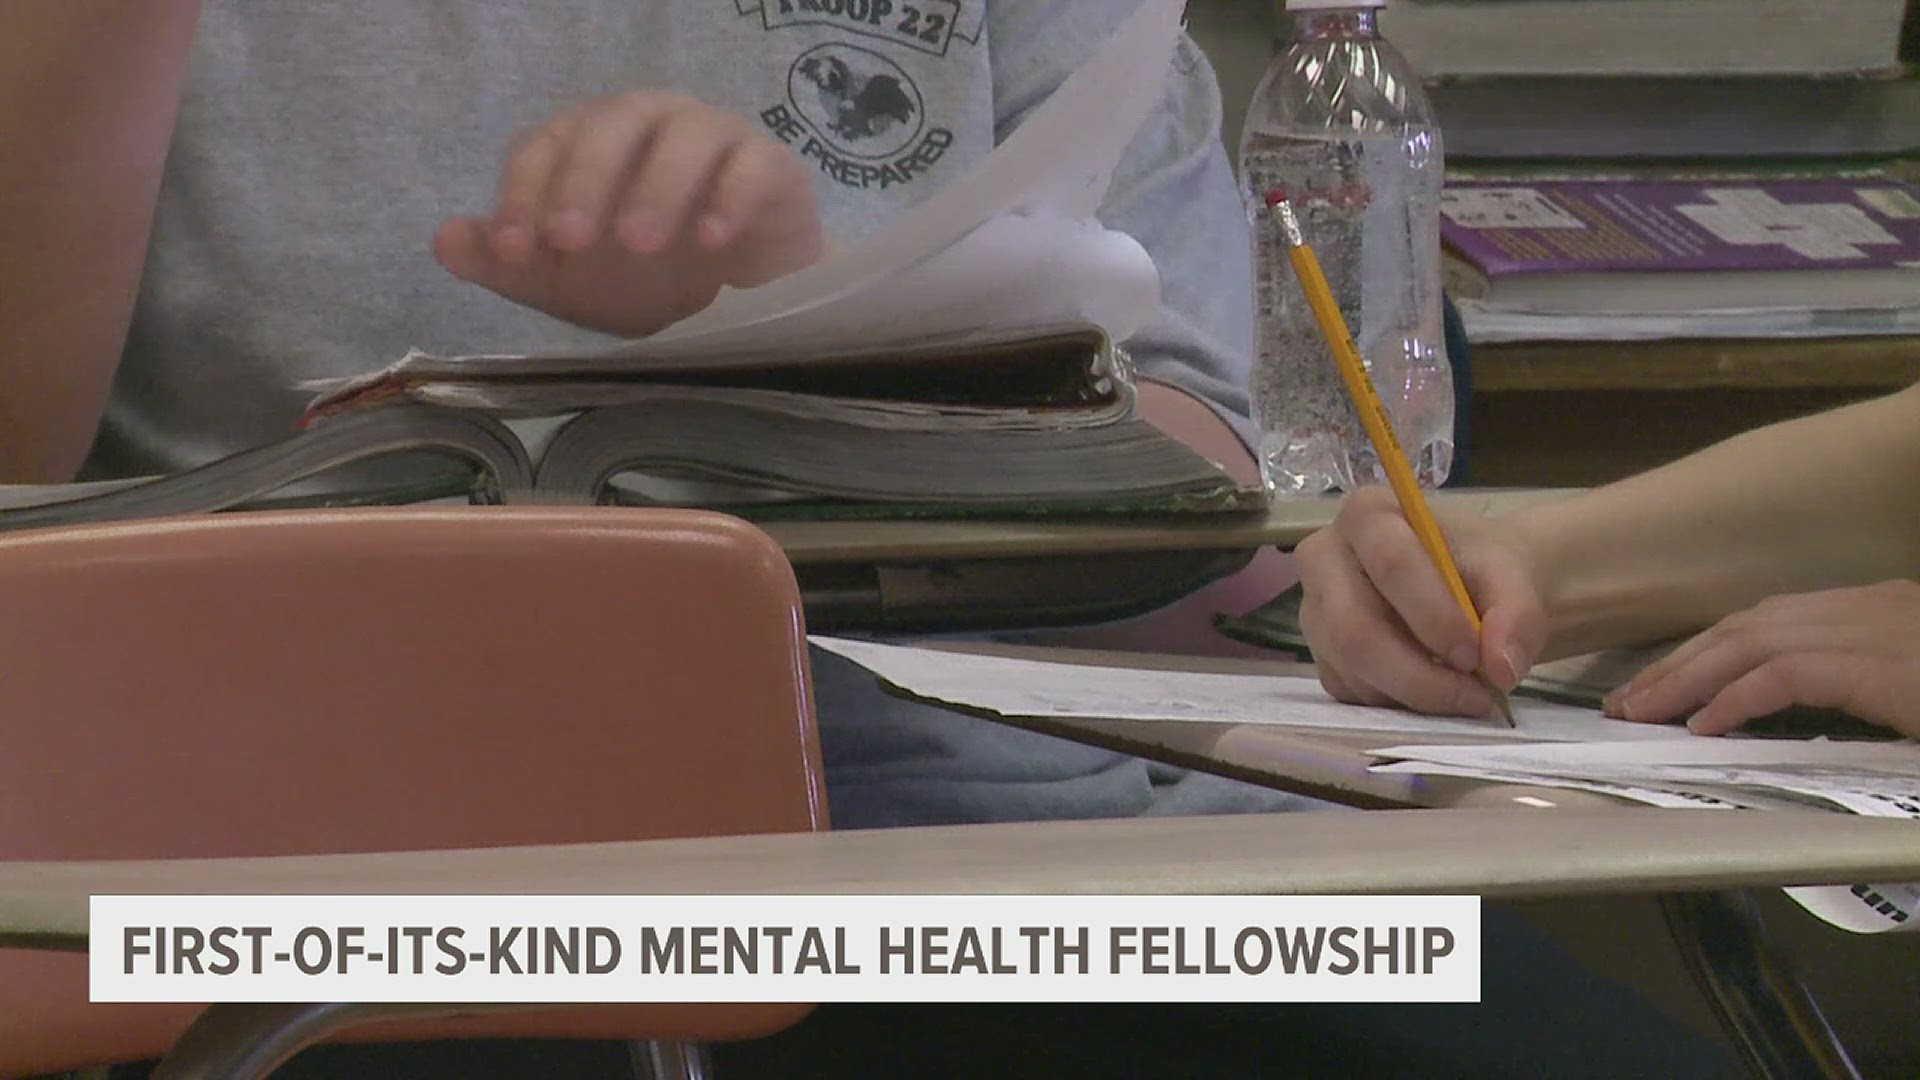 The paras will be equipped with a range of mental health skills. It's made possible through the University of Iowa, in hopes this changes school landscapes in Iowa.